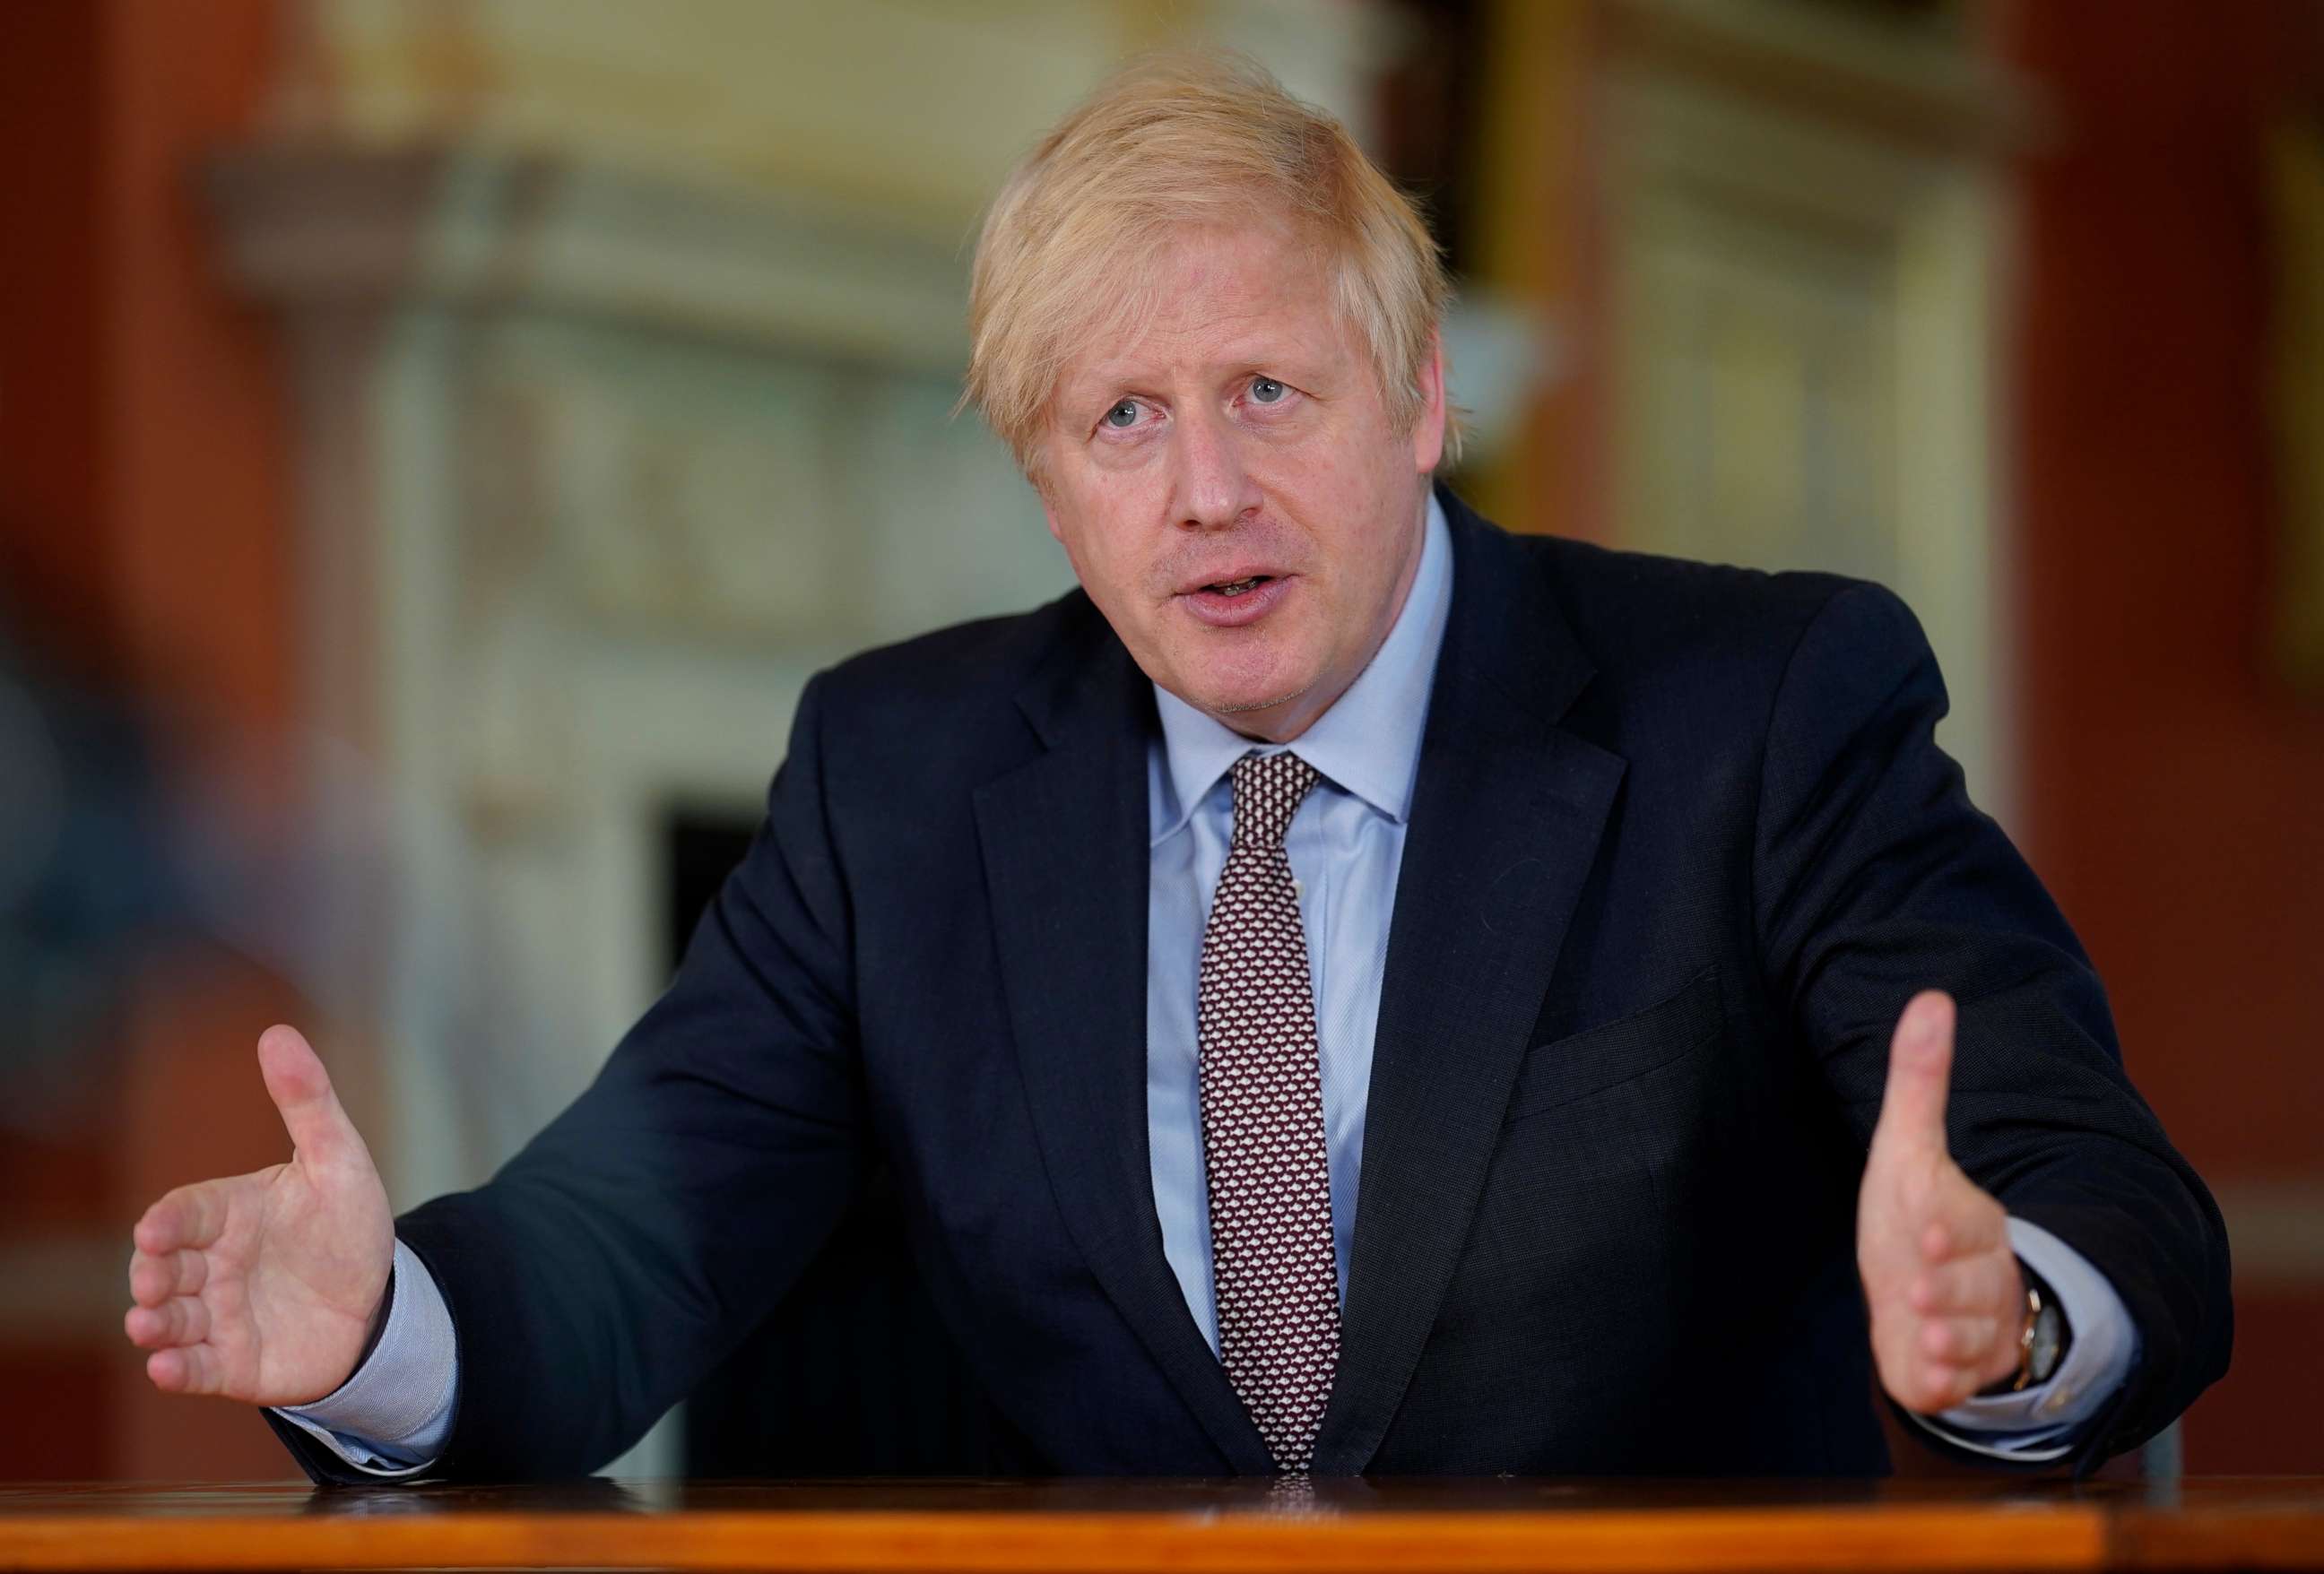 PHOTO: LONDON, ENGLAND - In this handout image provided by No 10 Downing Street, Britain's Prime Minister Boris Johnson records a televised message to the nation released on May 10, 2020 in London, England. 